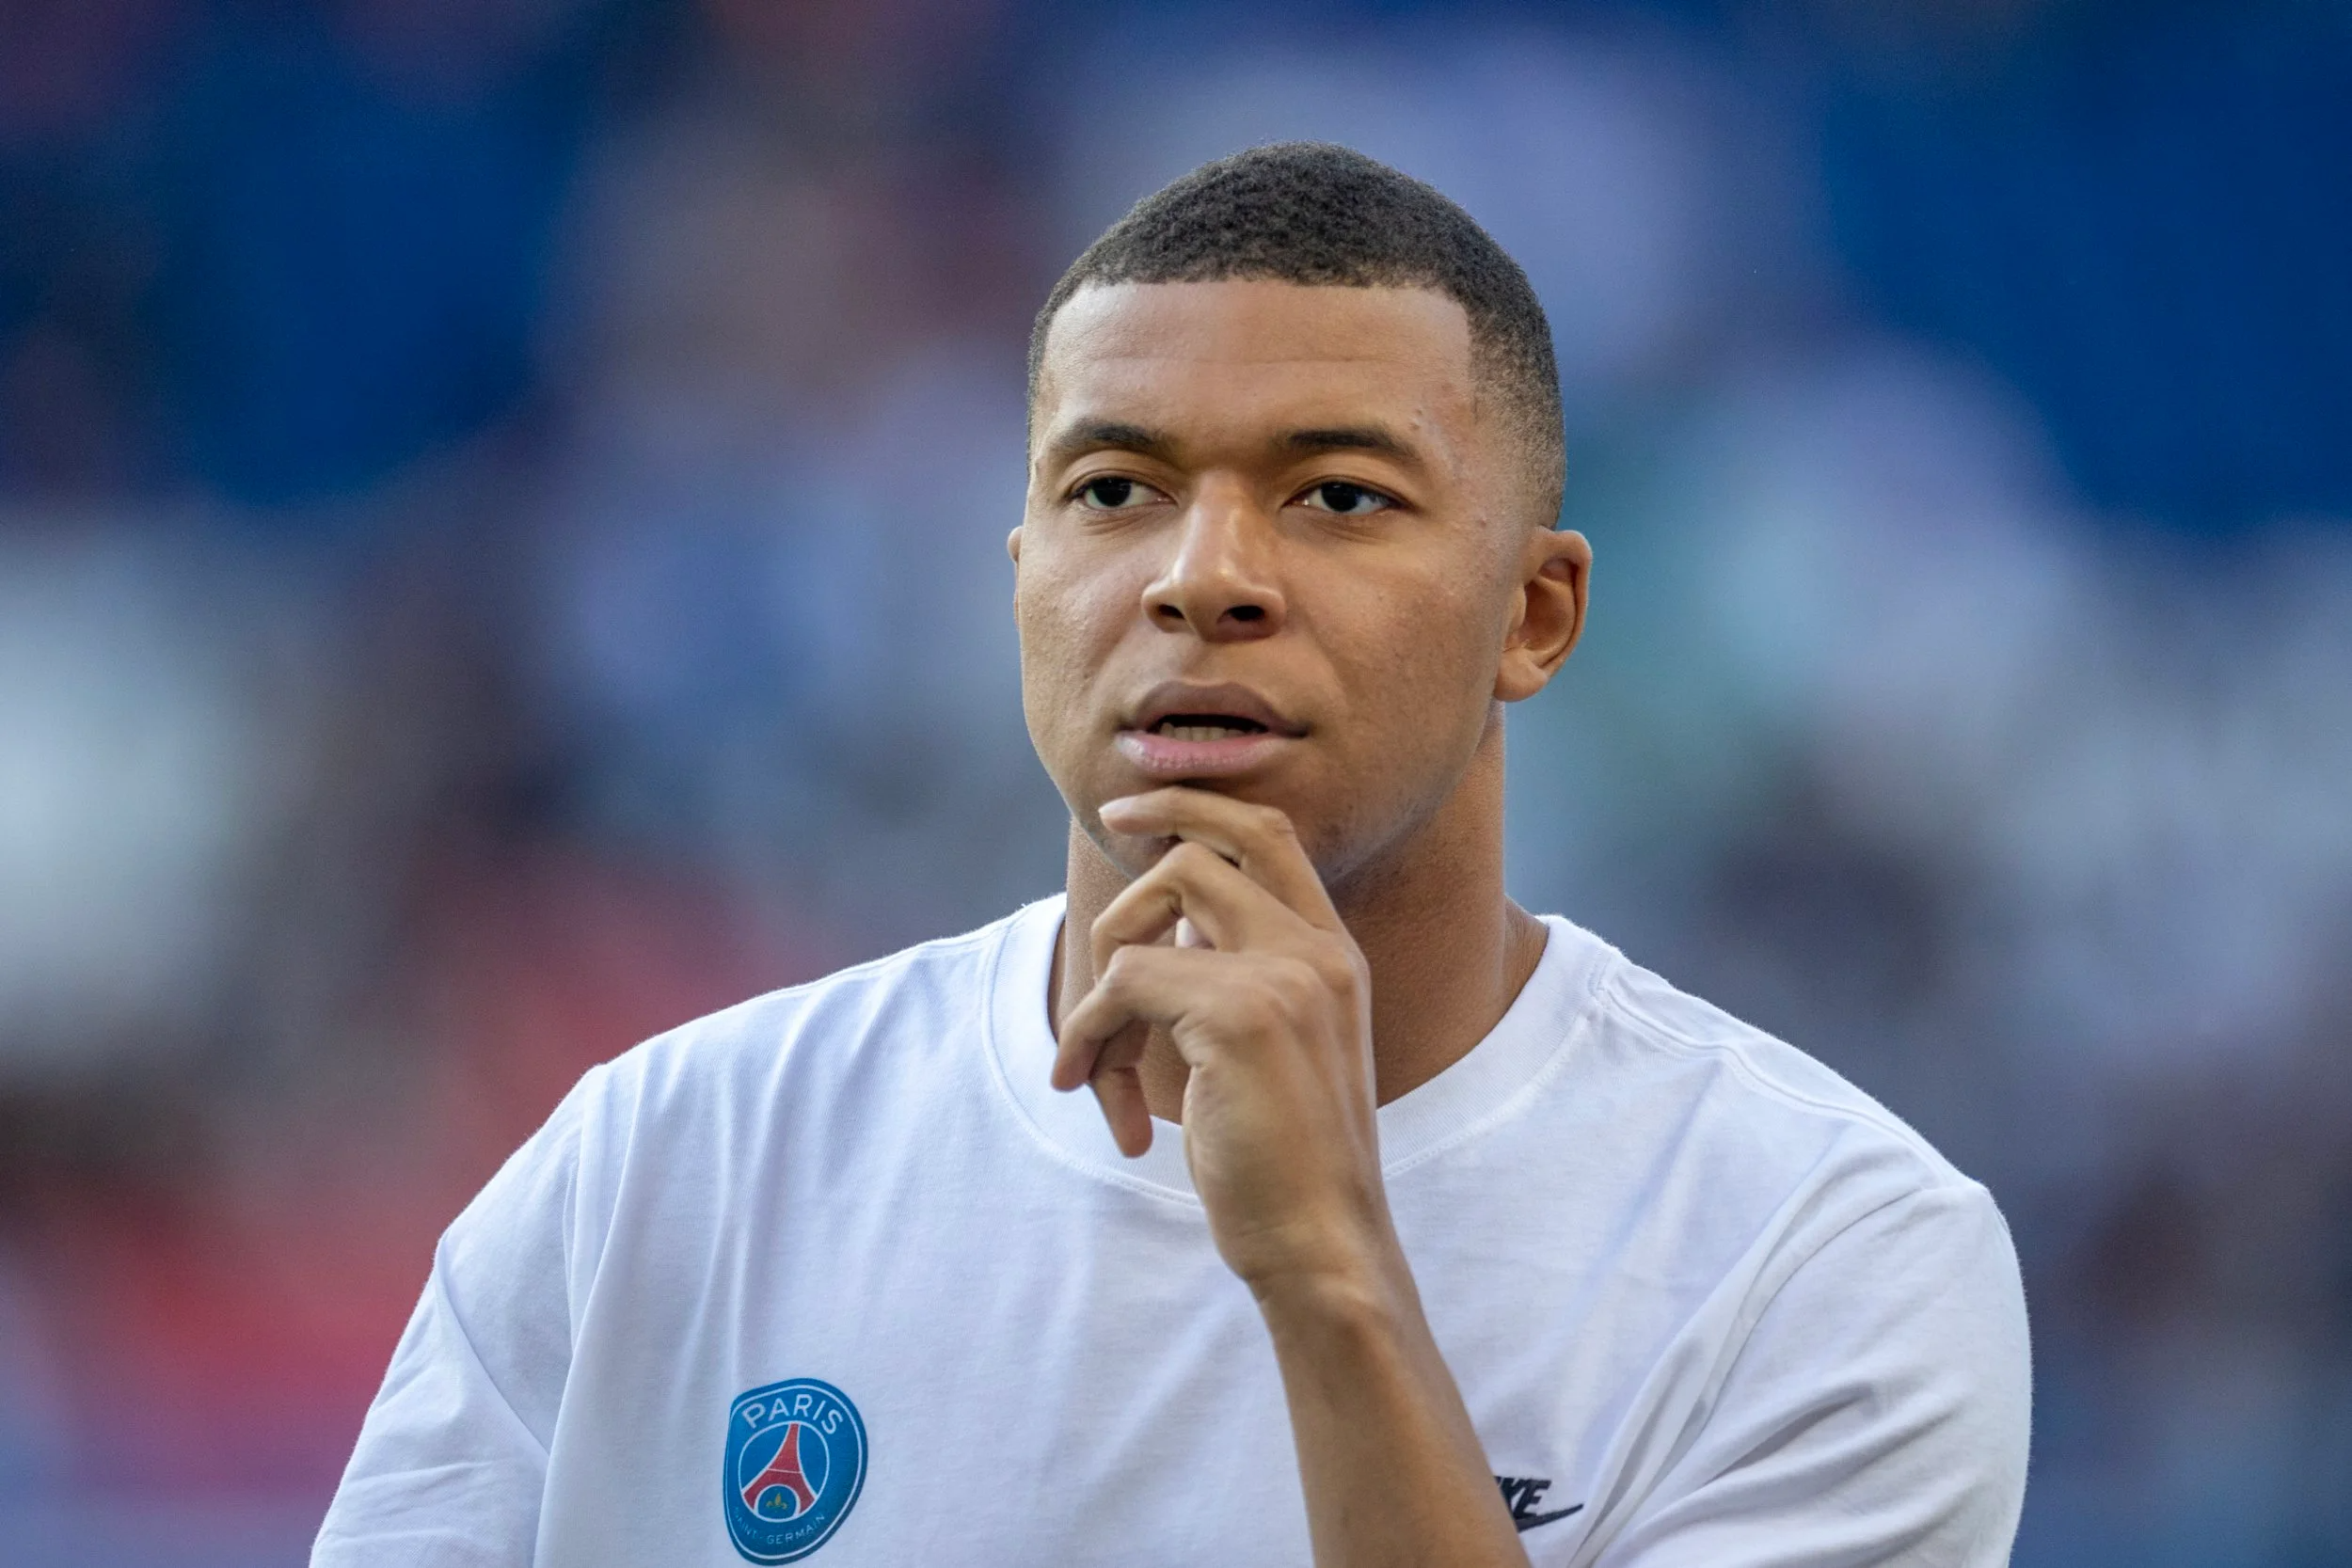 El Debate: Real Madrid to Earn €1 Billion for Six Years of Kylian Mbappé's Contract